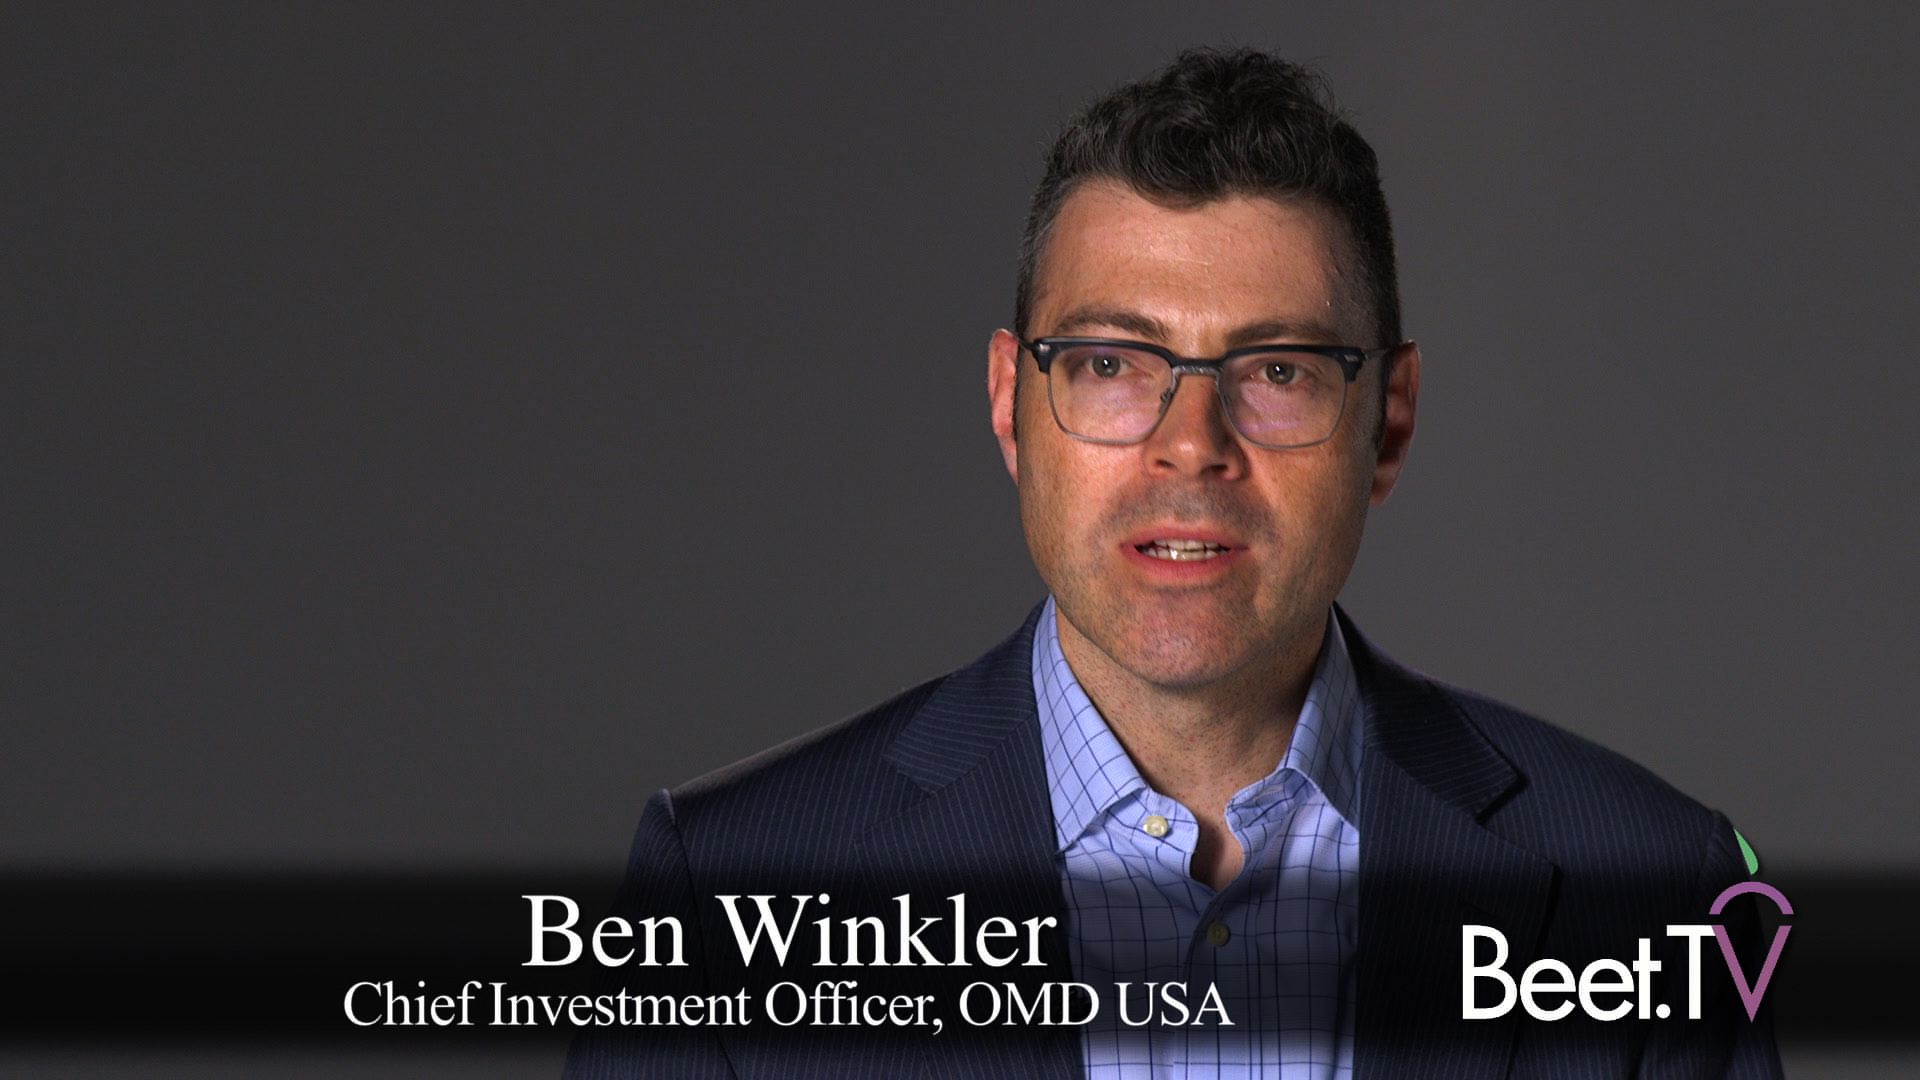 OMD’s Winkler On Ad Formats: You Can’t Go Wrong By Considering Consumers